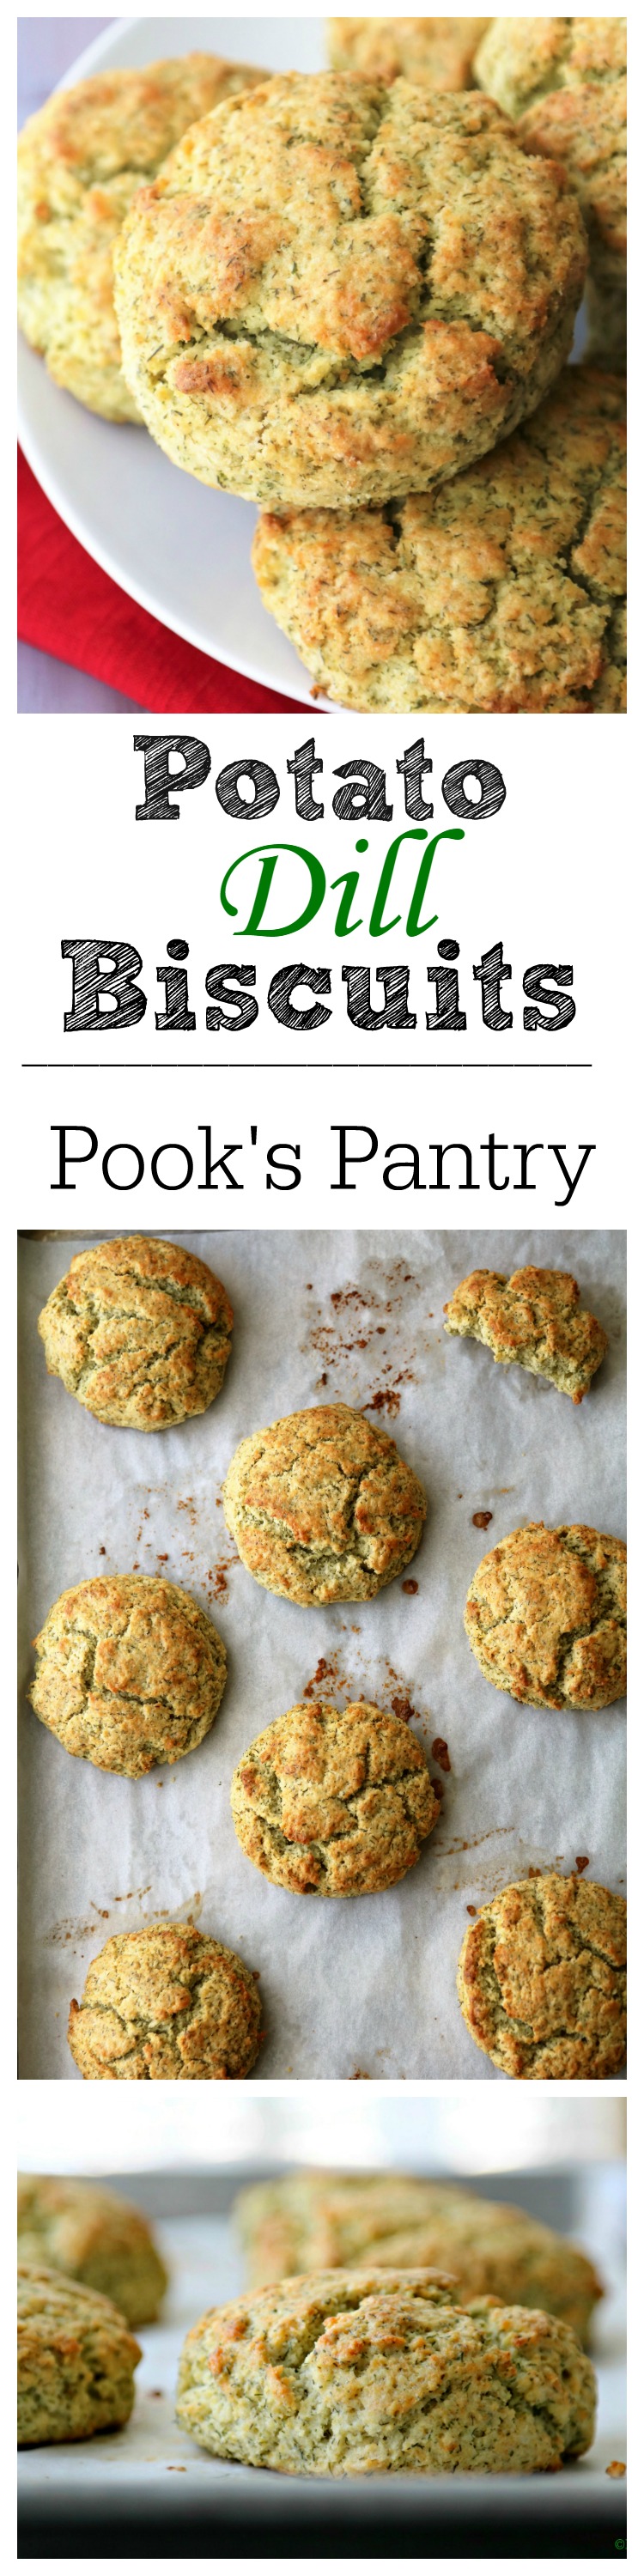 Potato Dill Biscuits - Pook's Pantry